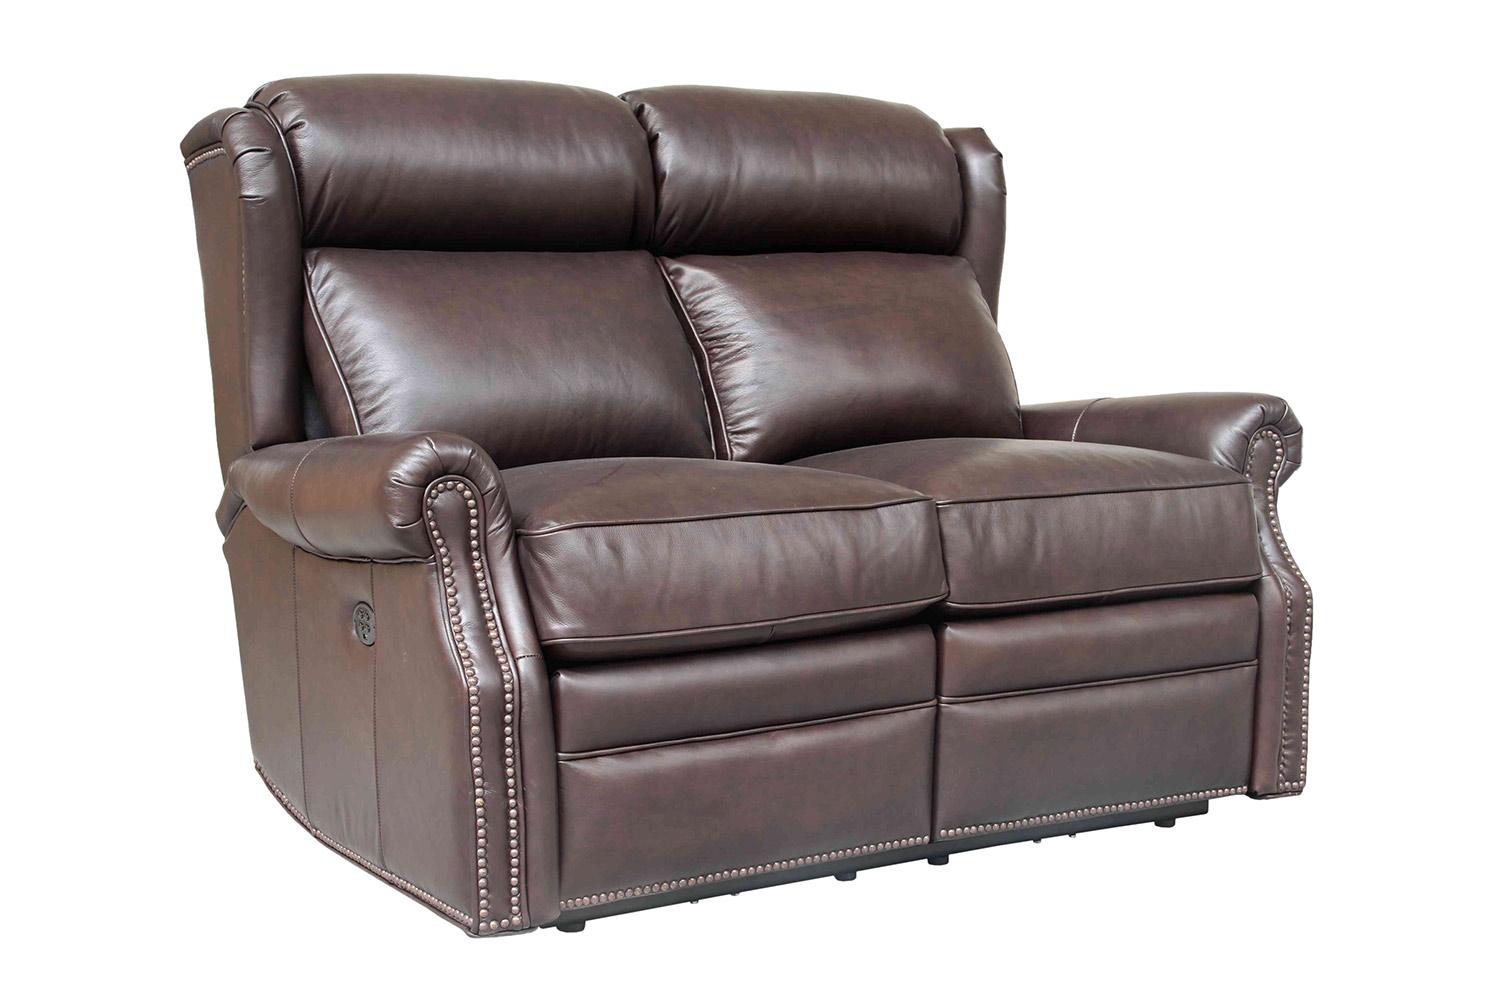 Barcalounger Southington Power Reclining Loveseat with Power Head Rests - Shoreham Dark Umber/All Leather